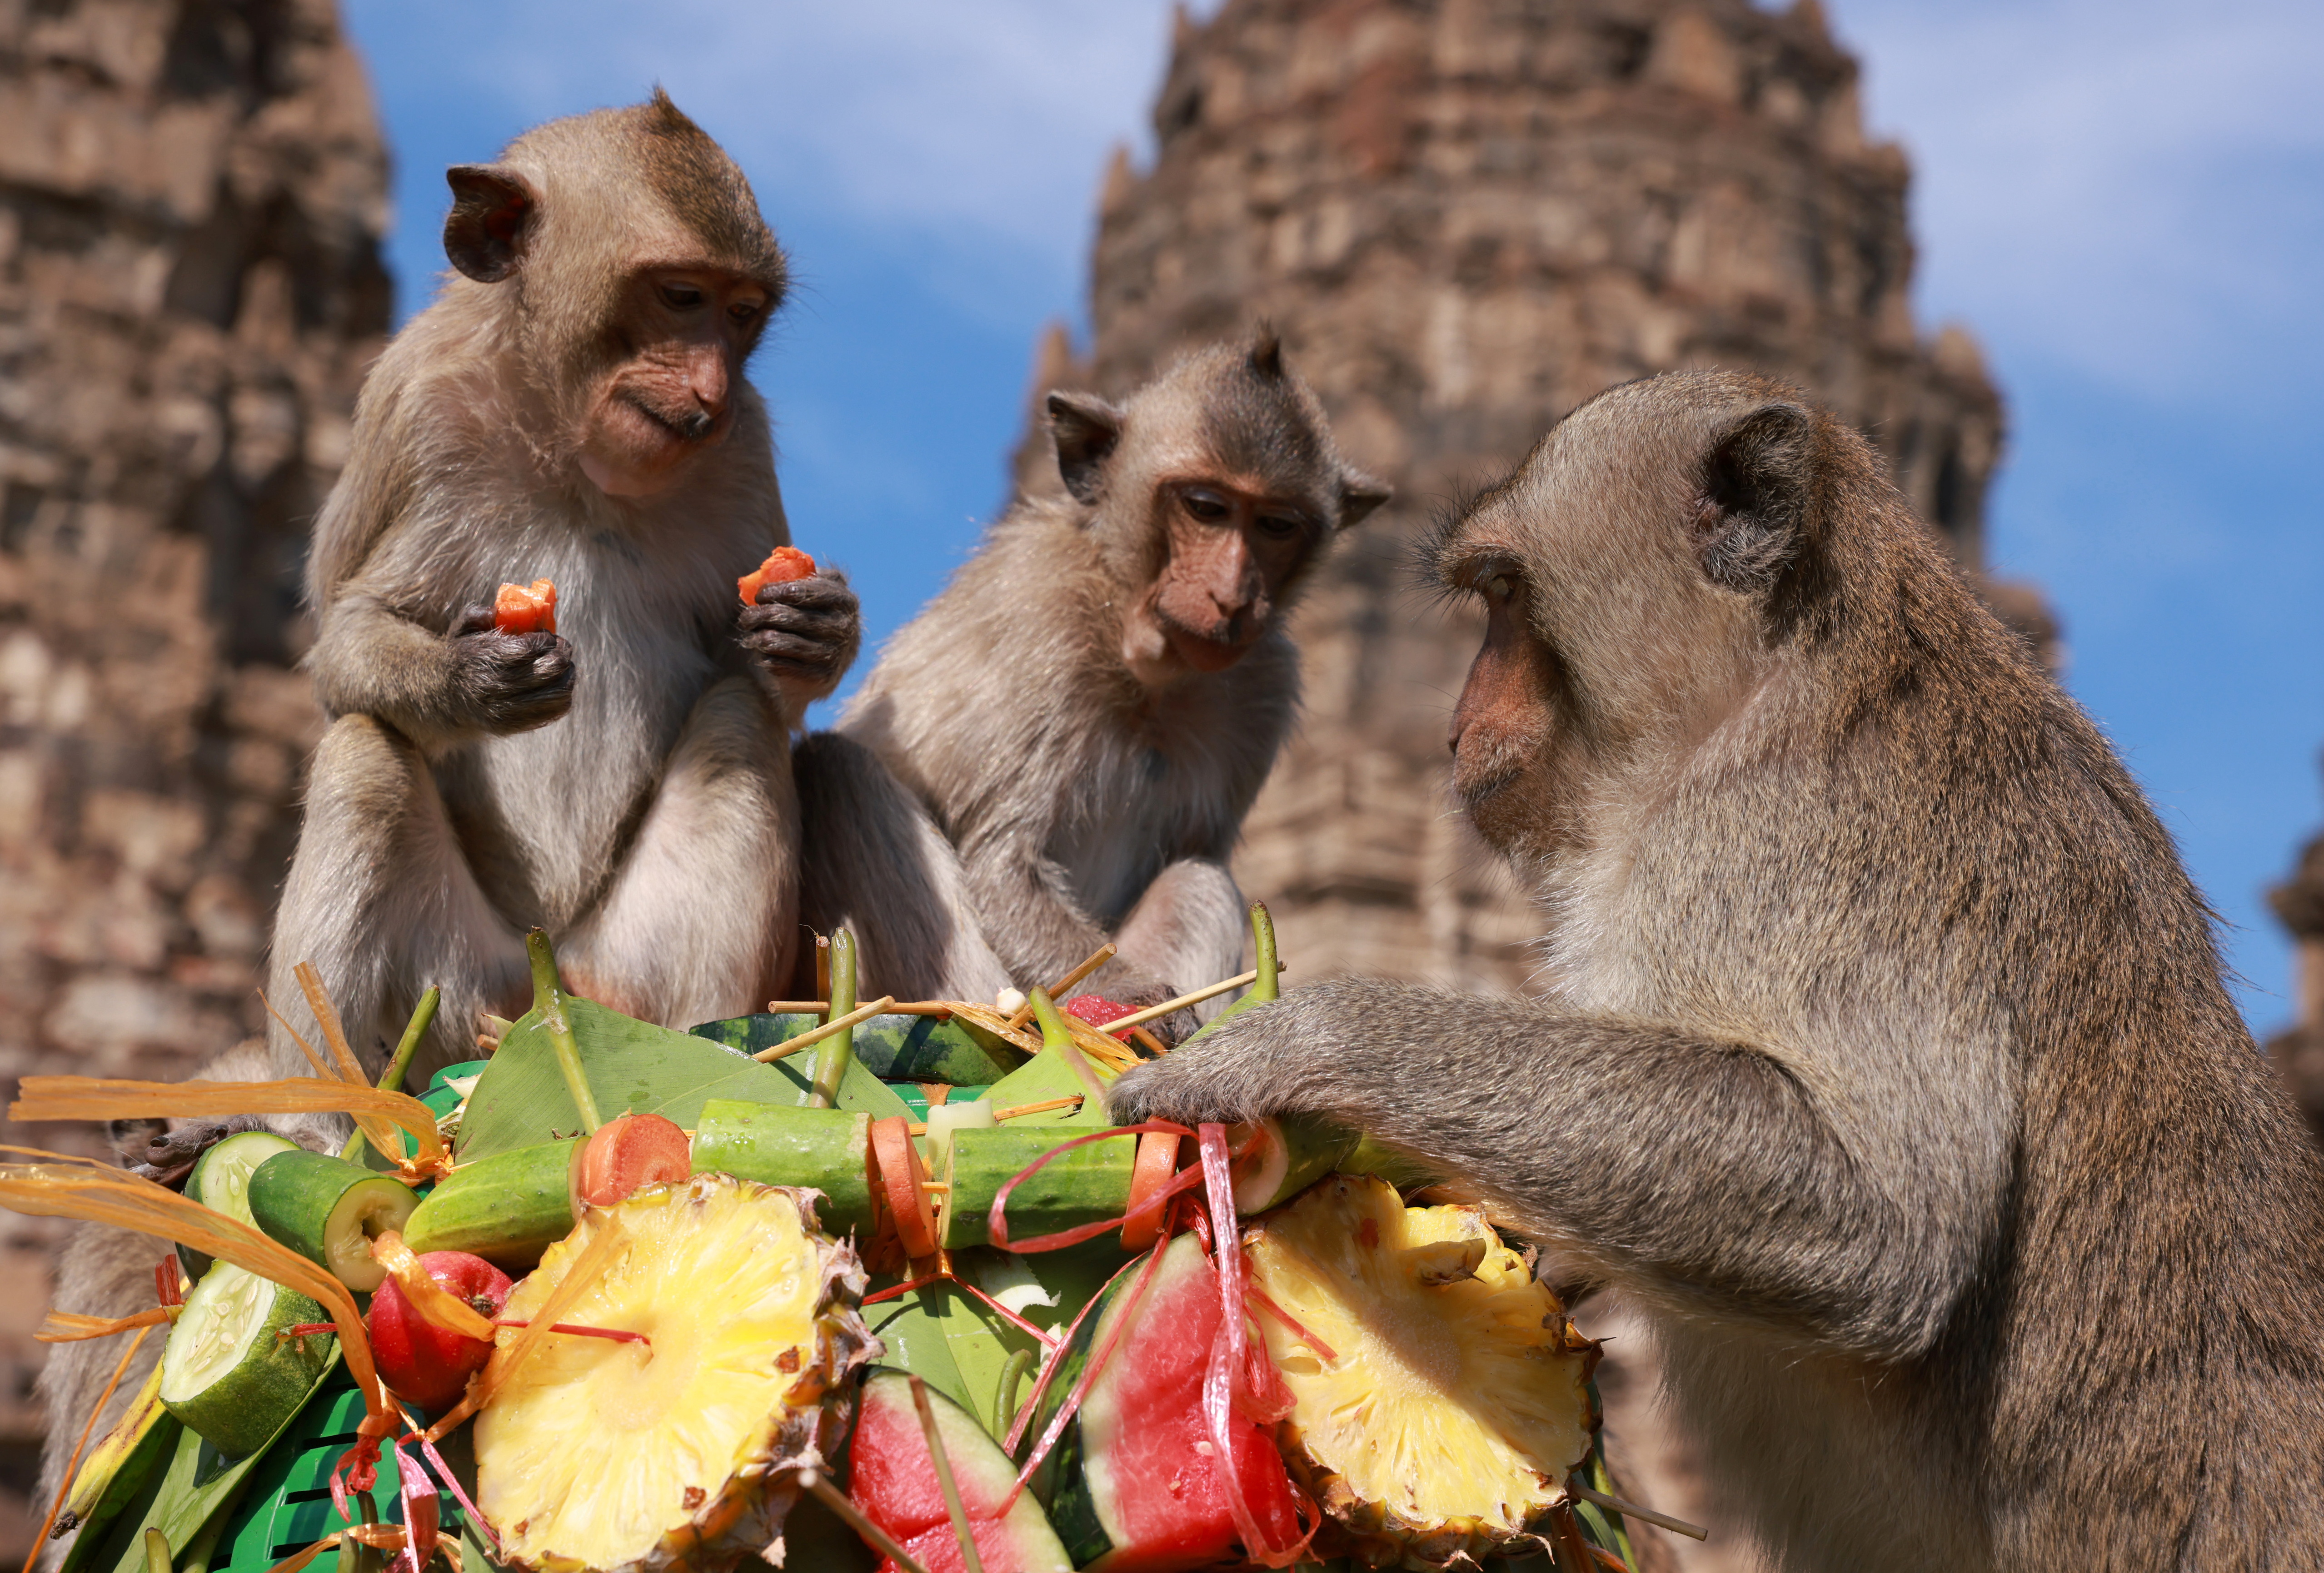 Monkeys eat fruit during the annual Monkey Festival which resumed after a two-year gap caused by  the COVID-19 pandemic, in Lopburi province, Thailand, November 28, 2021. REUTERS/Jiraporn Kuhakan